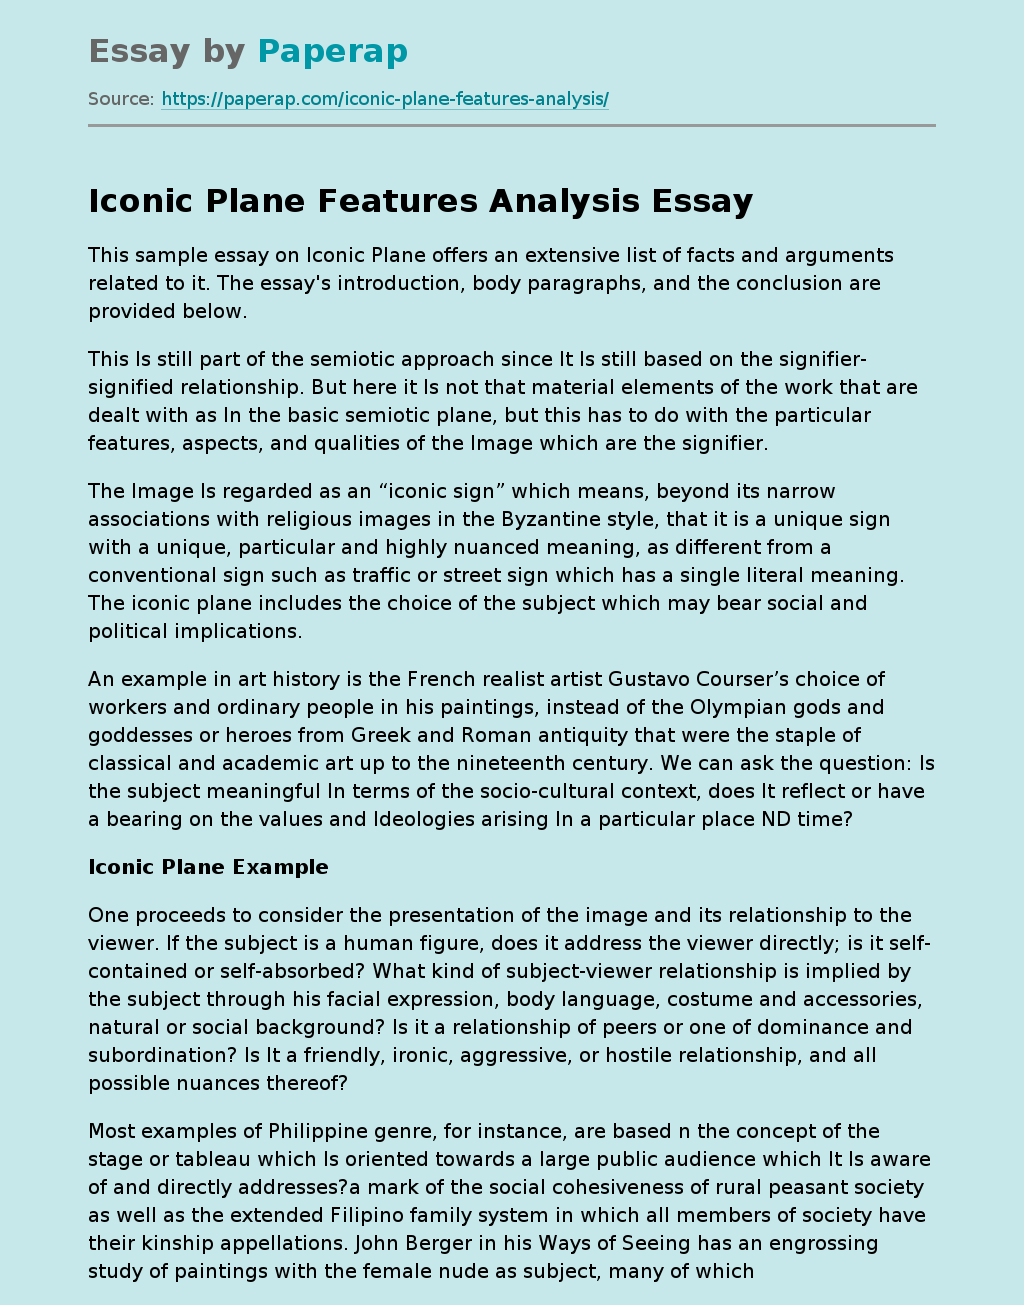 Iconic Plane Features Analysis